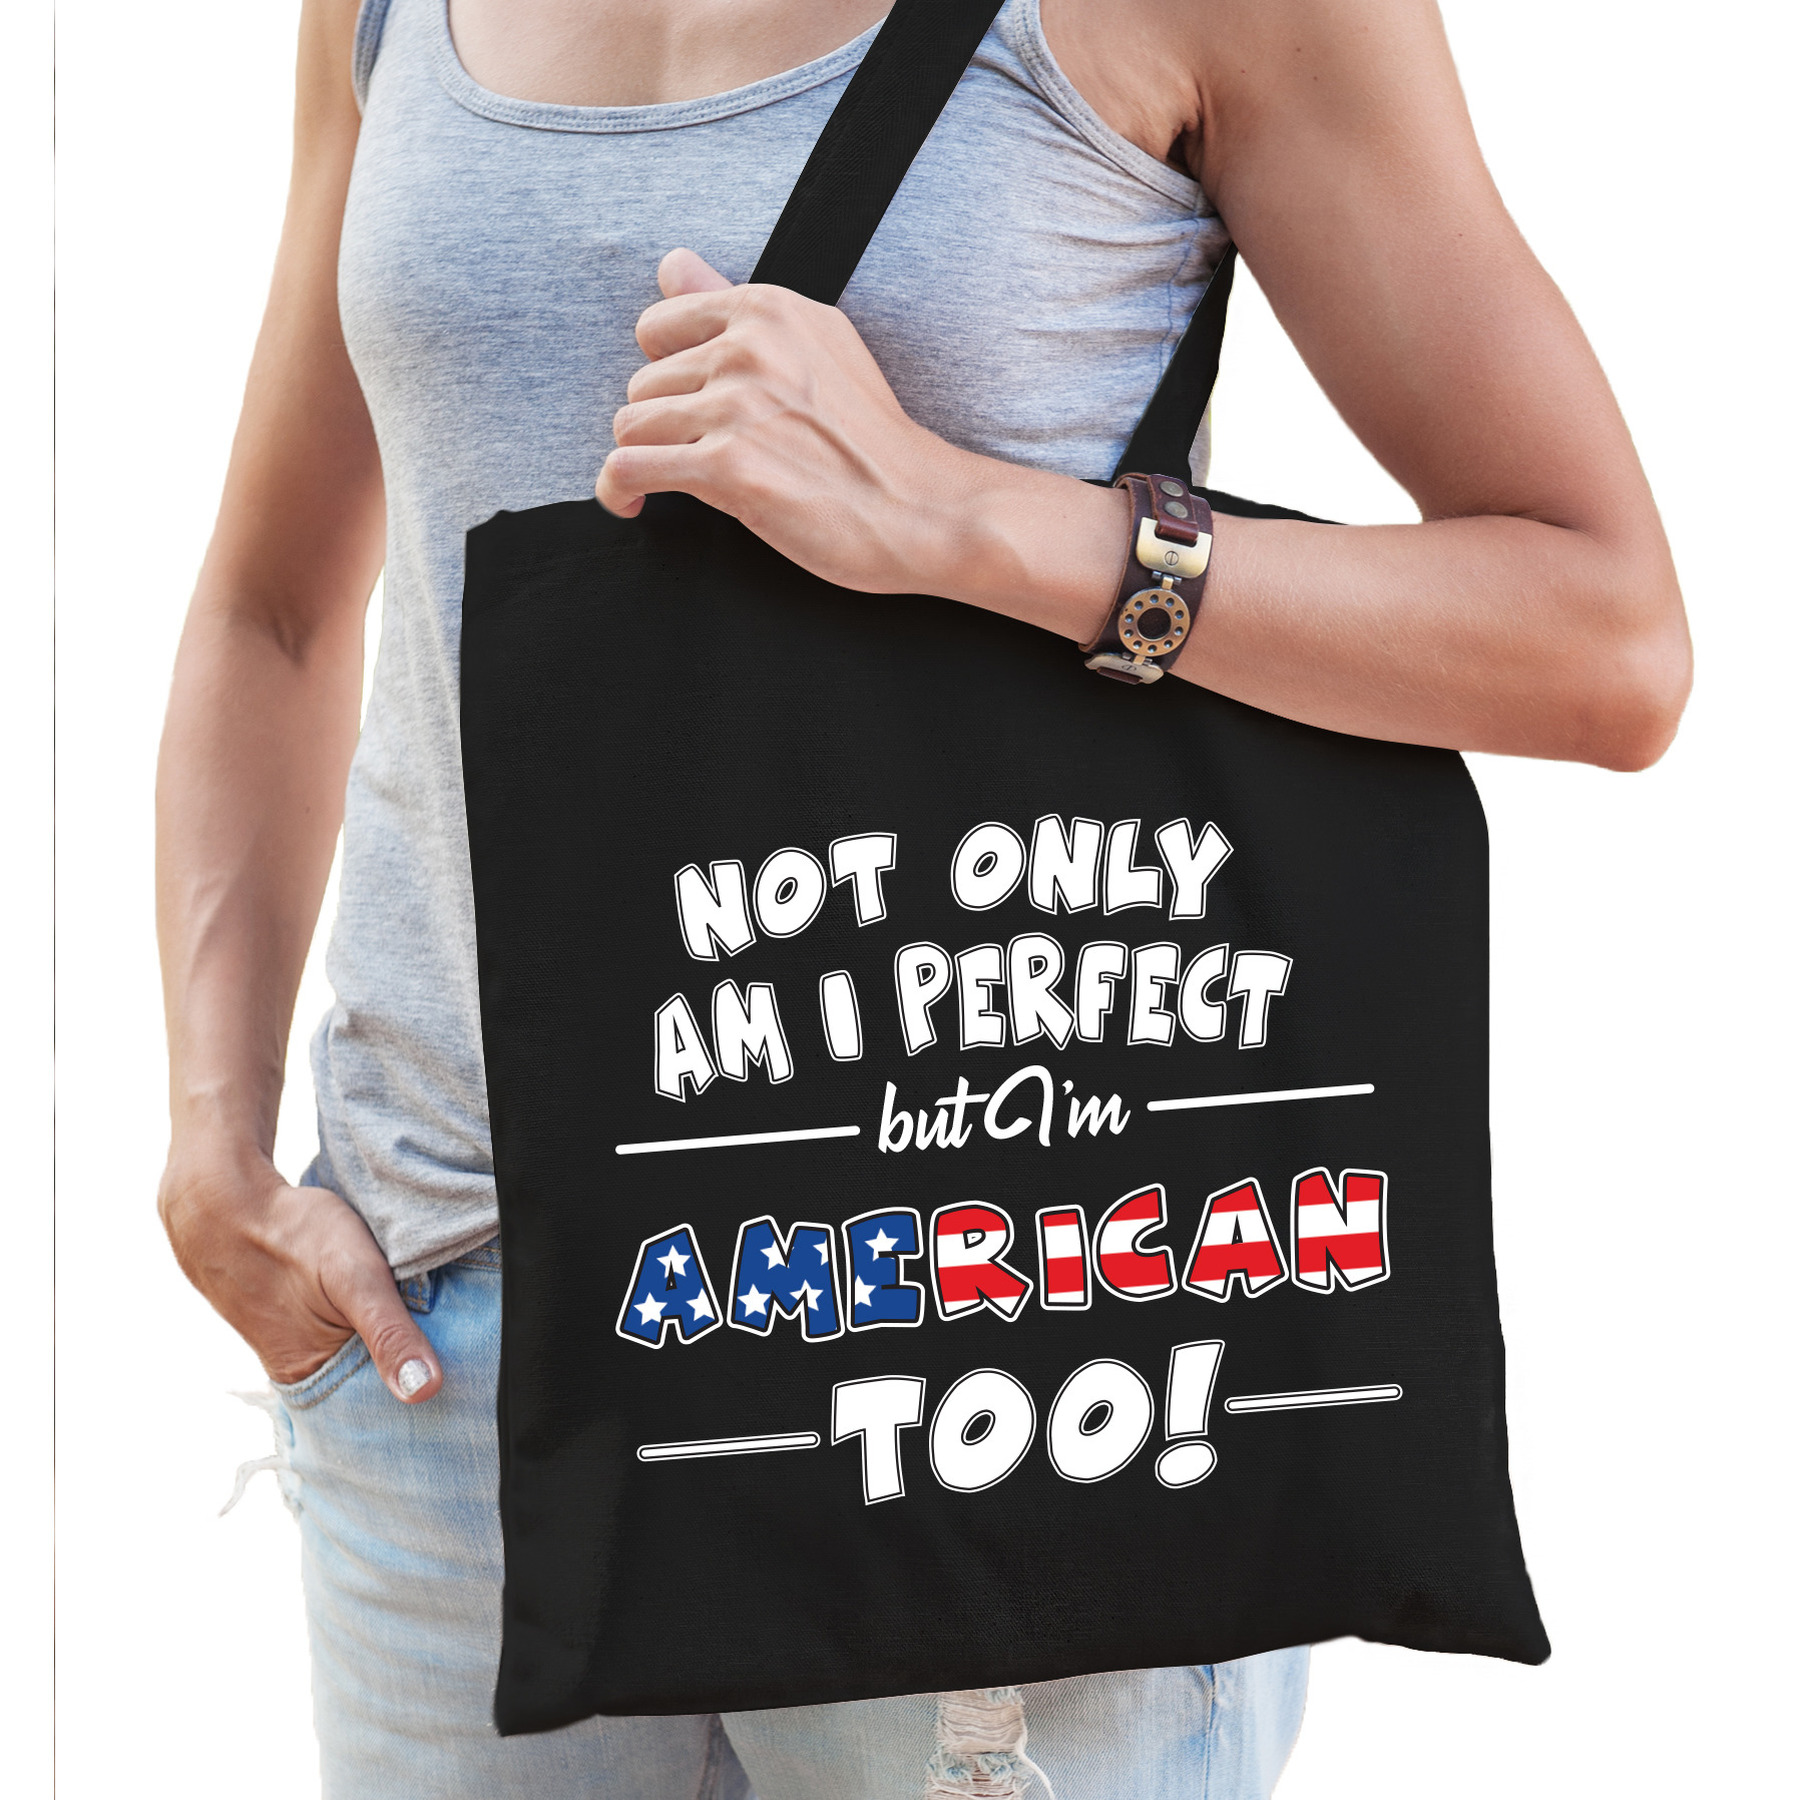 Not only perfect but American-Amerika too fun cadeau tas voor dames